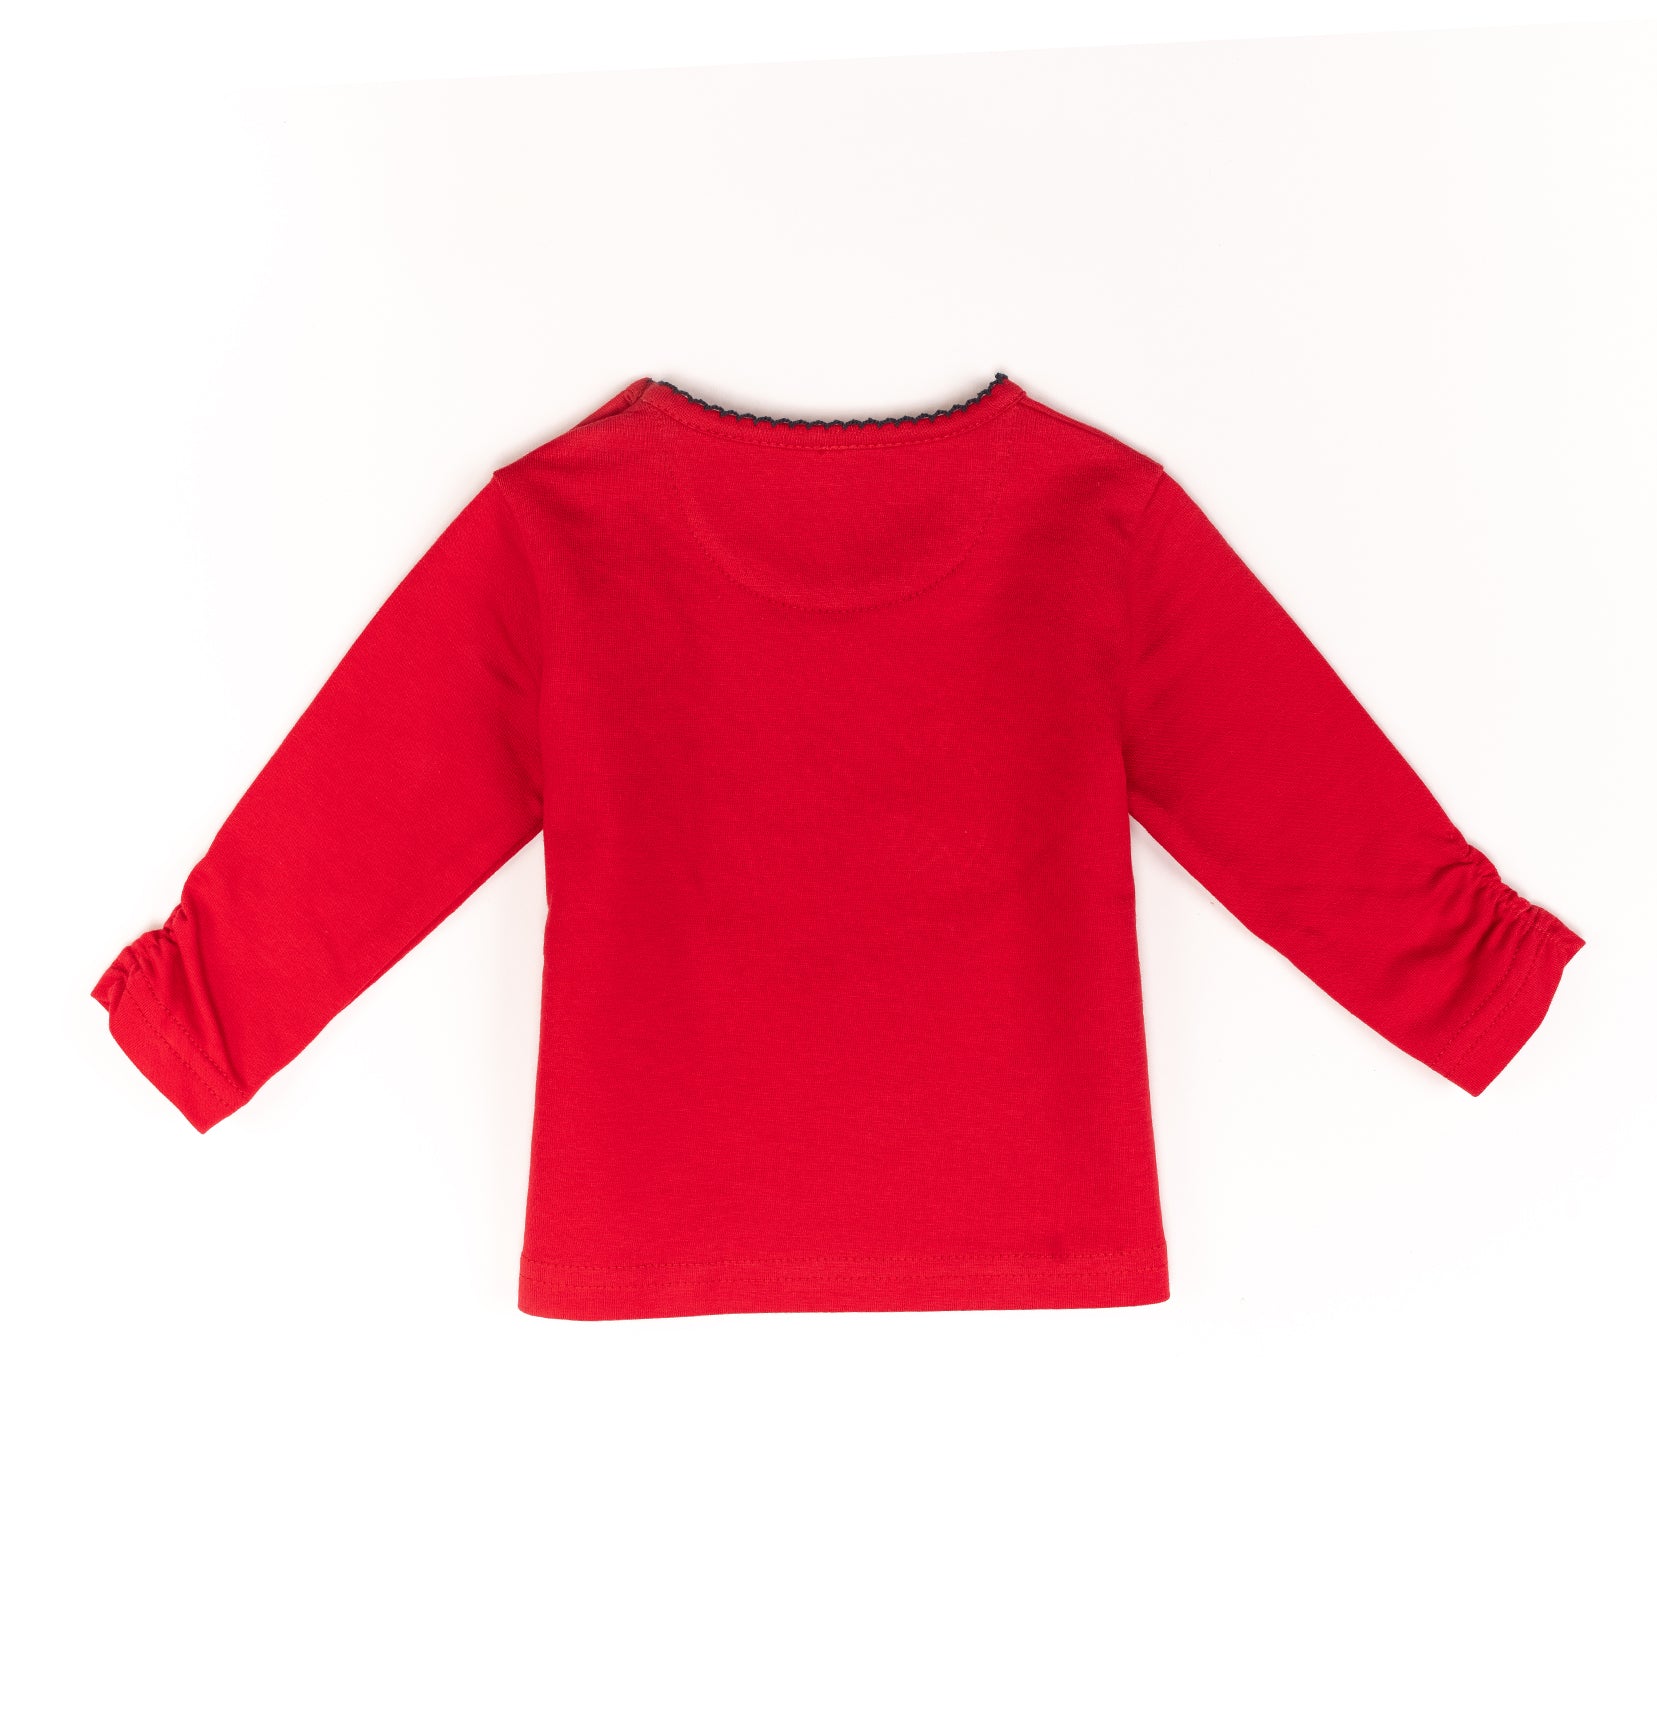 Cute long sleeve baby girl top by Pompelo